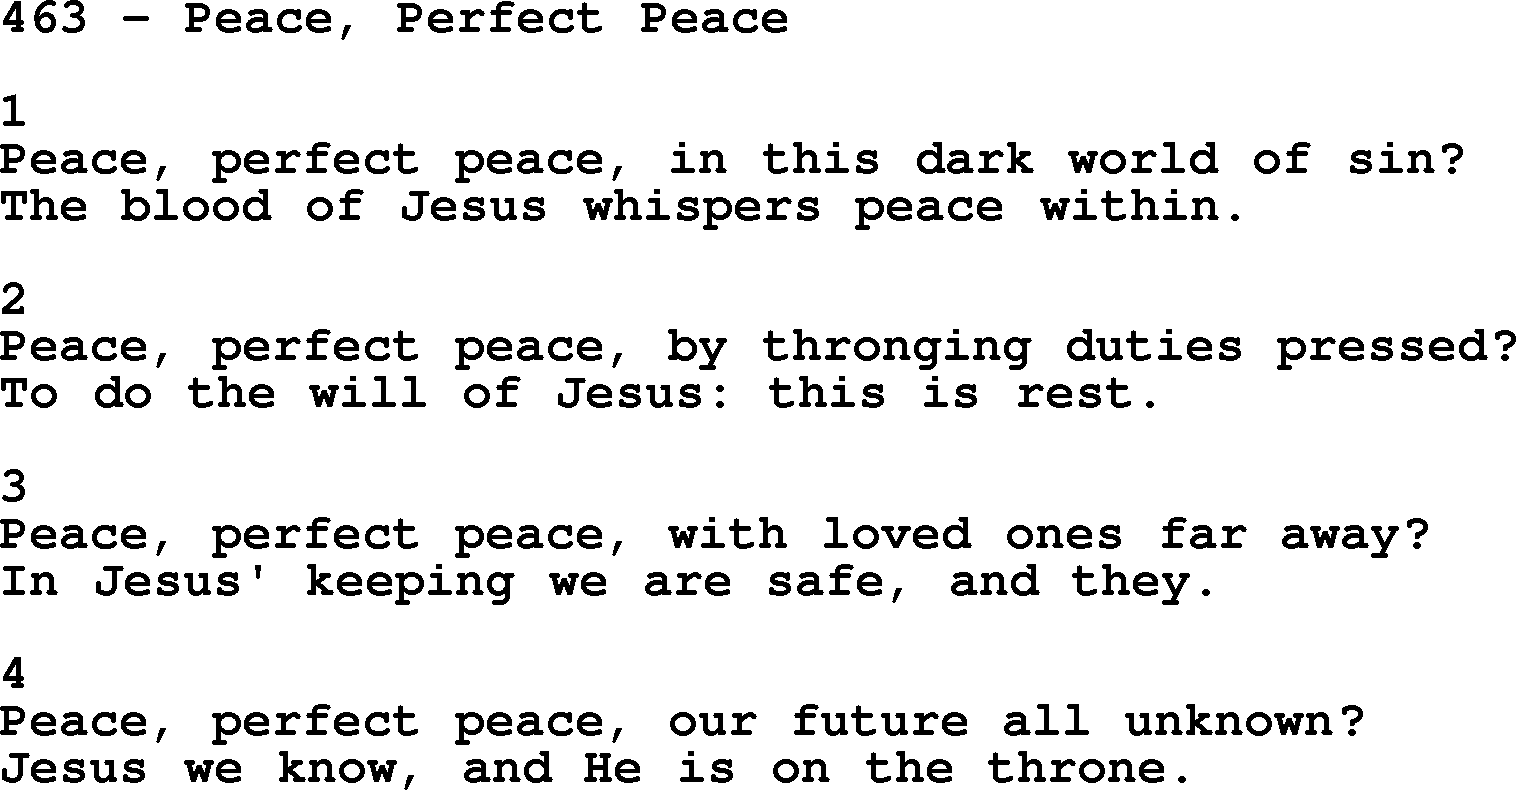 Complete Adventis Hymnal, title: 463-Peace, Perfect Peace, with lyrics, midi, mp3, powerpoints(PPT) and PDF,